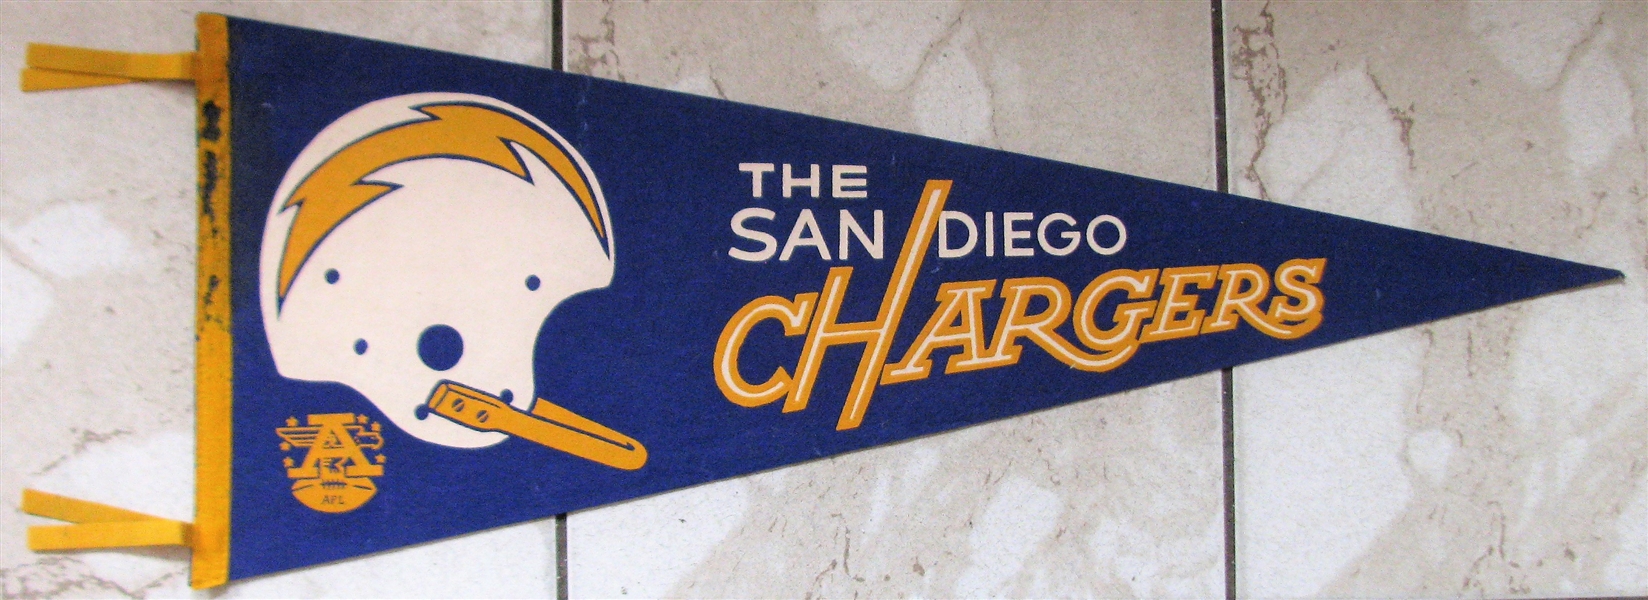 60's AFL SAN DIEGO CHARGERS PENNANT